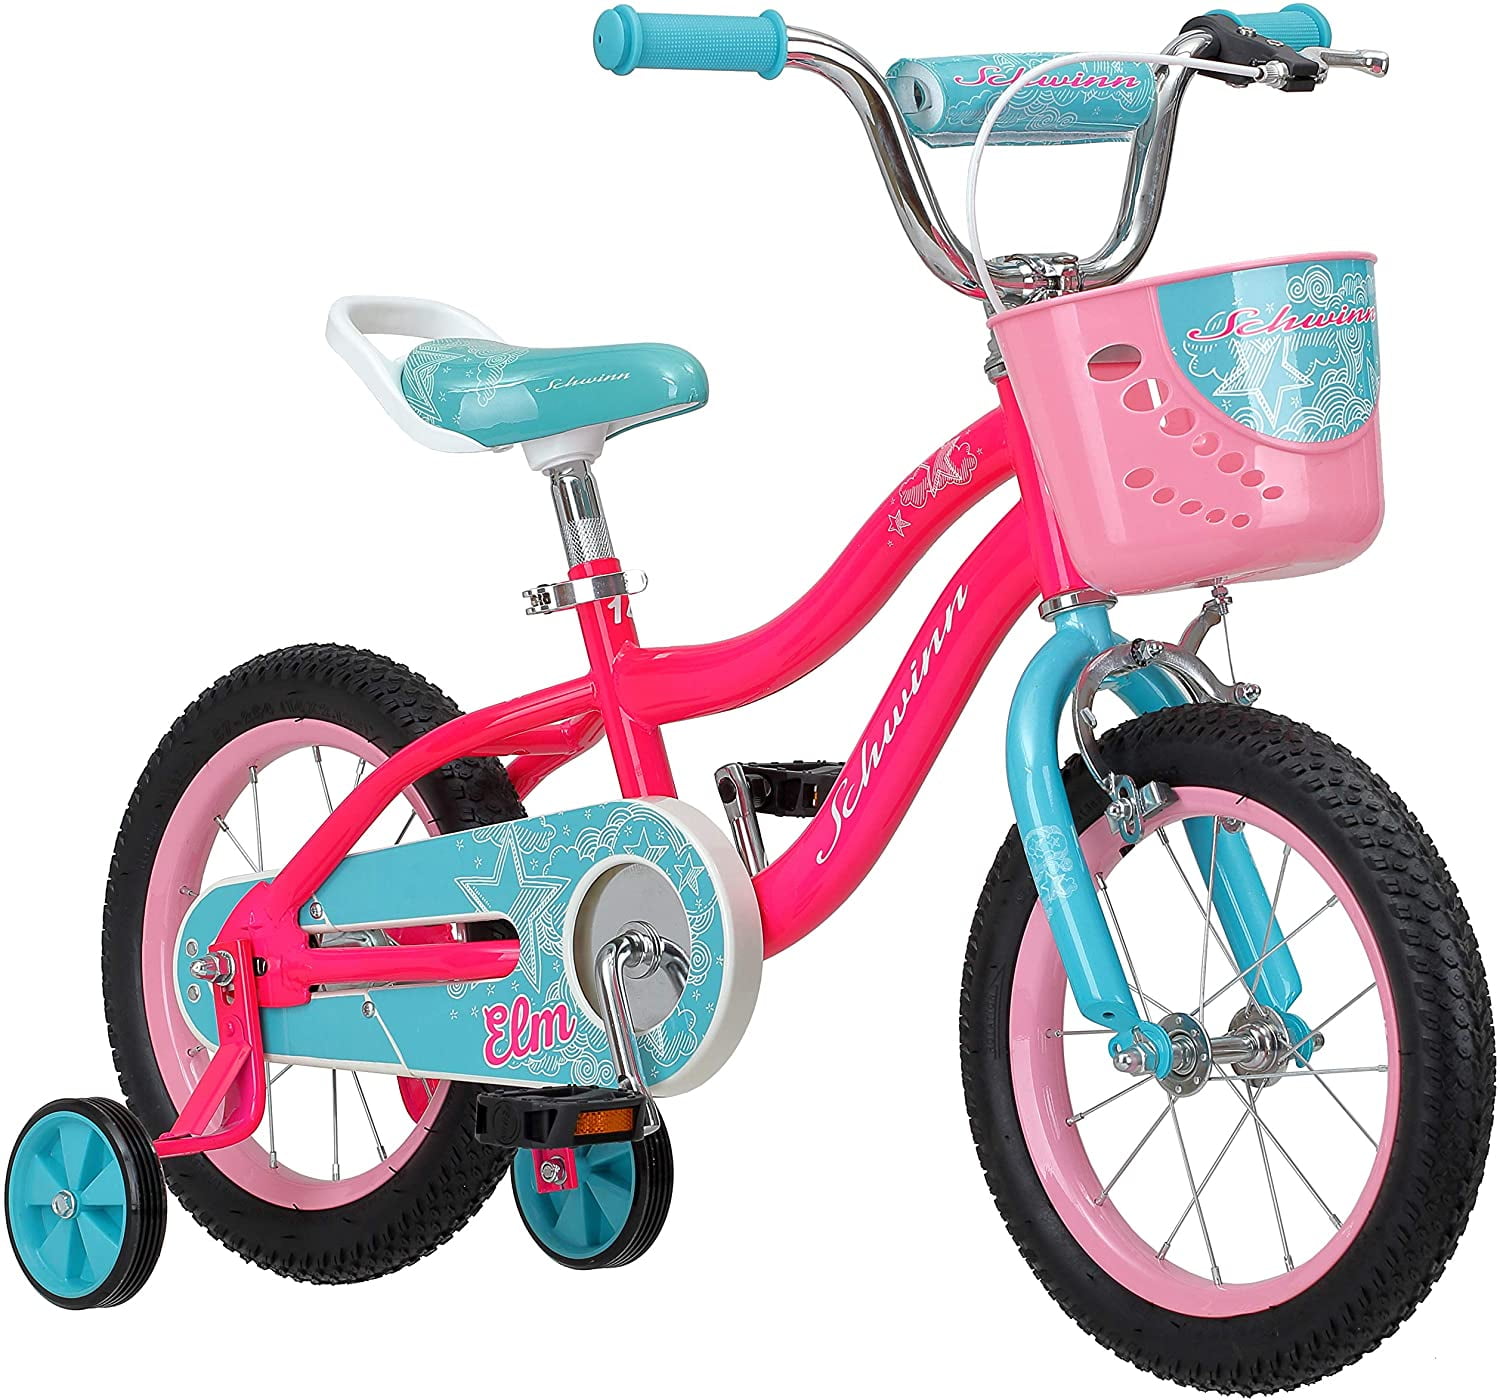 20 inch wheels for Ages 2 Years and Up Purple or Teal 16 14 12 Pink 18 Balance or Training Wheels Schwinn Elm Girls Bike for Toddlers and Kids Adjustable Seat 